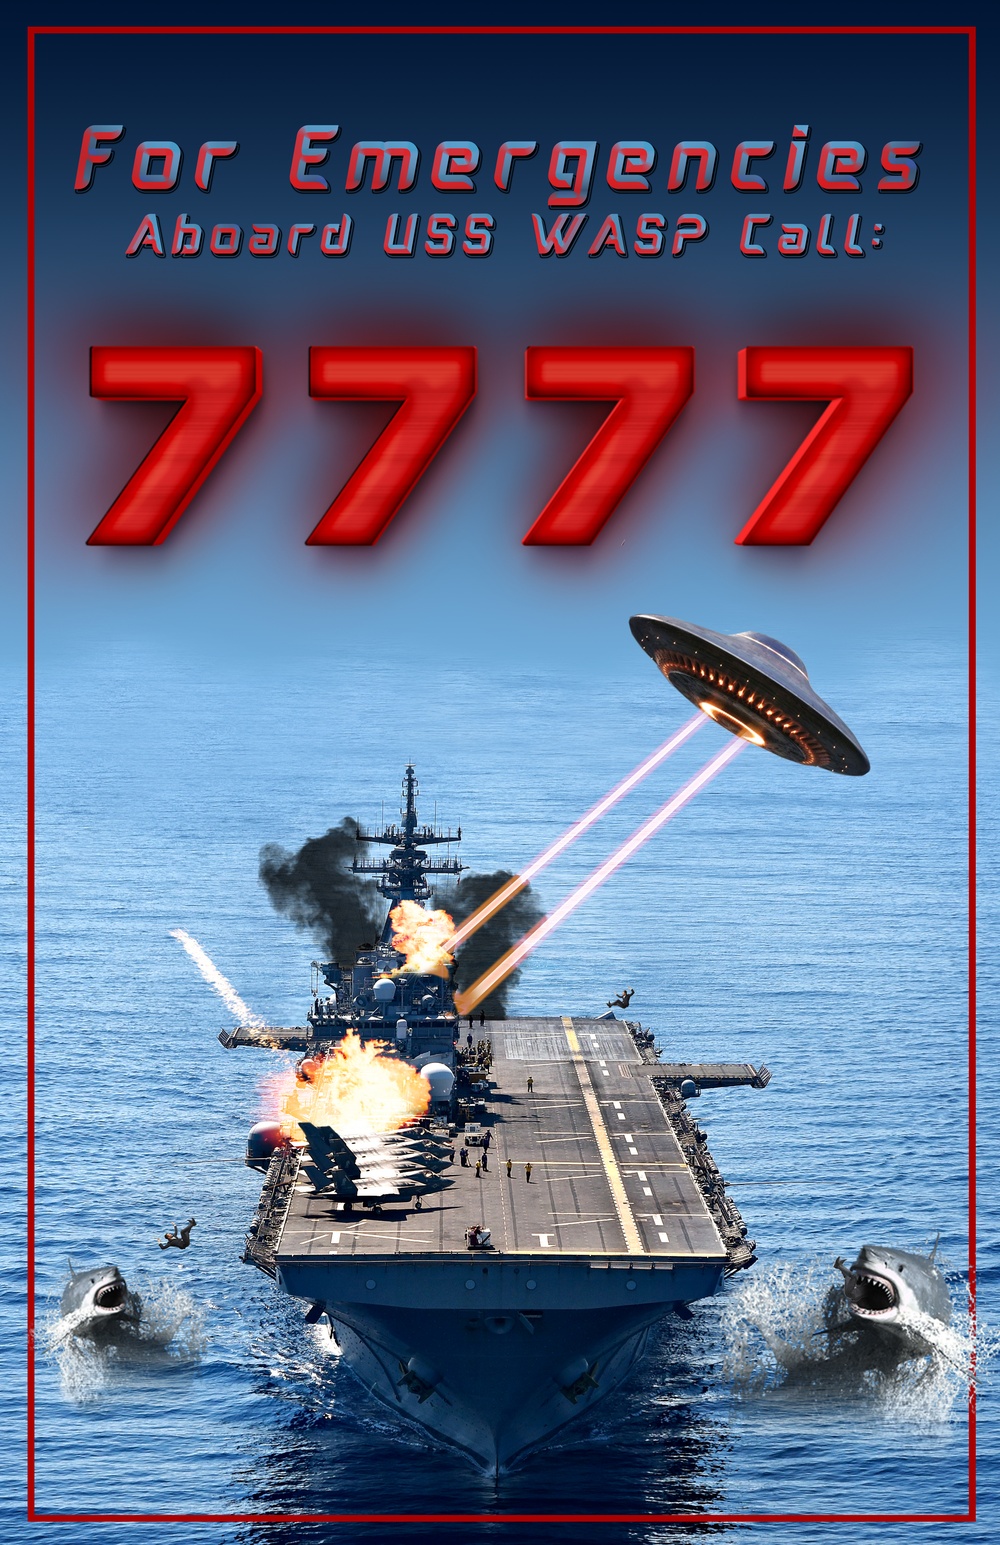 USS Wasp Emergency Number Poster